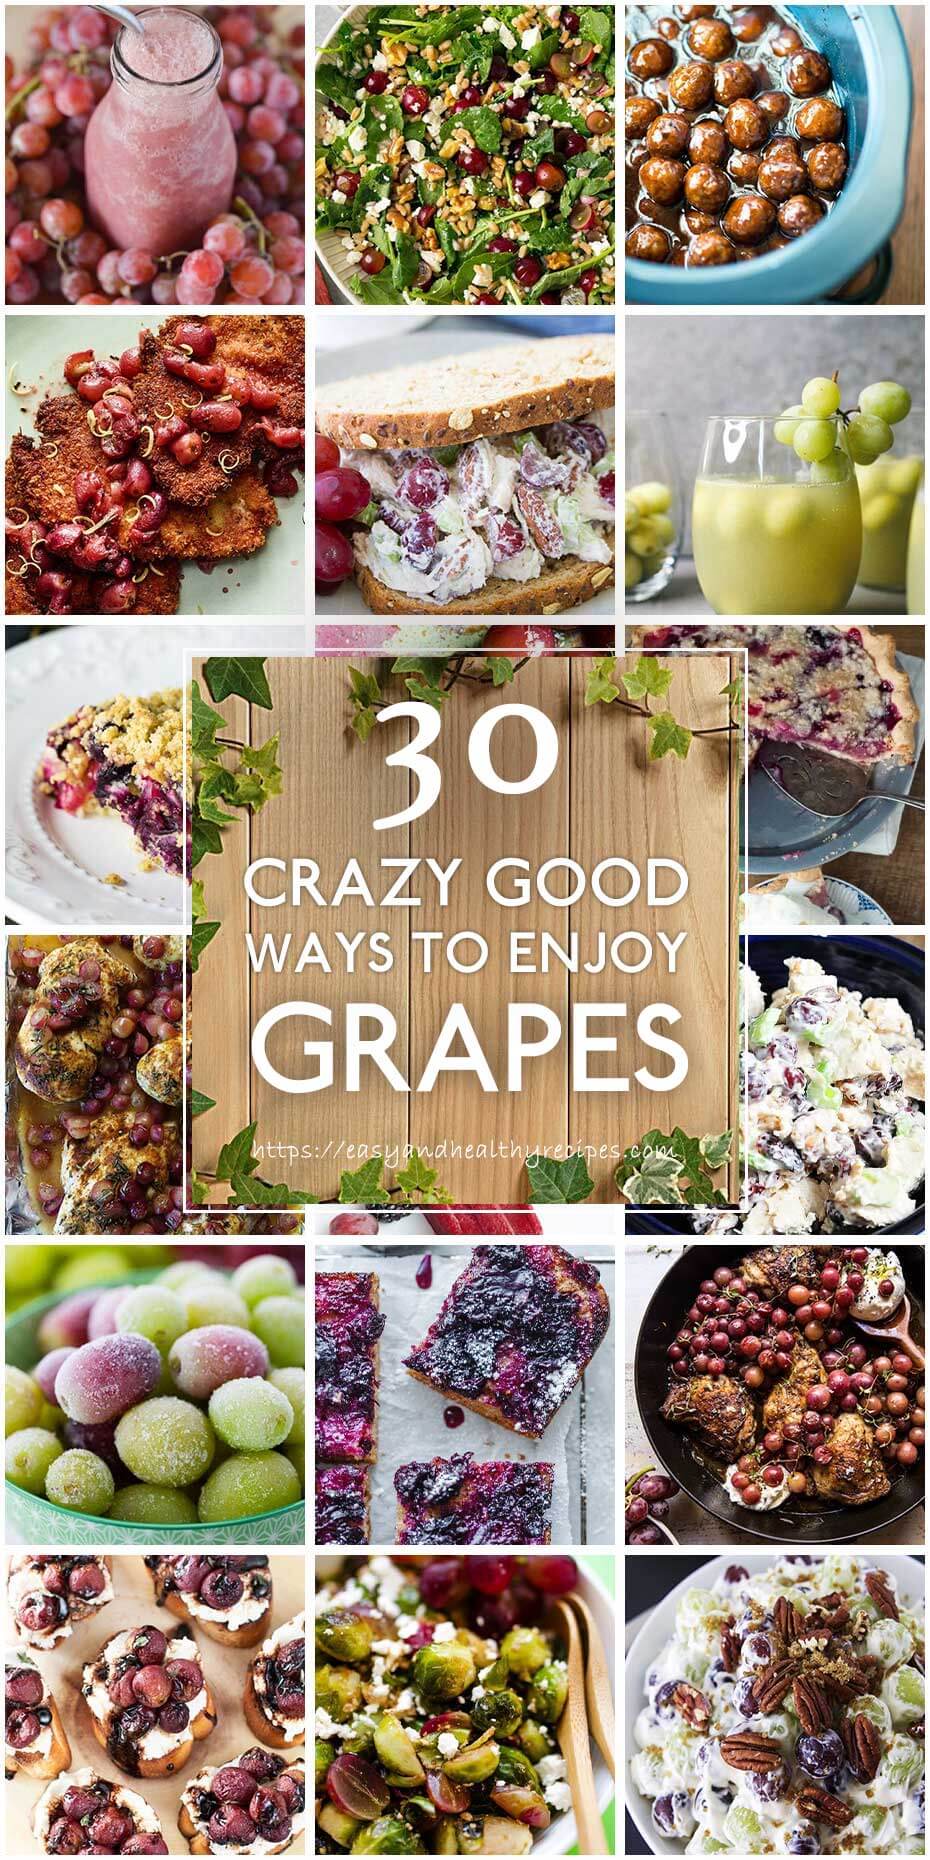 Here Are 30 Crazy Good Ways To Enjoy Grapes, Grapes